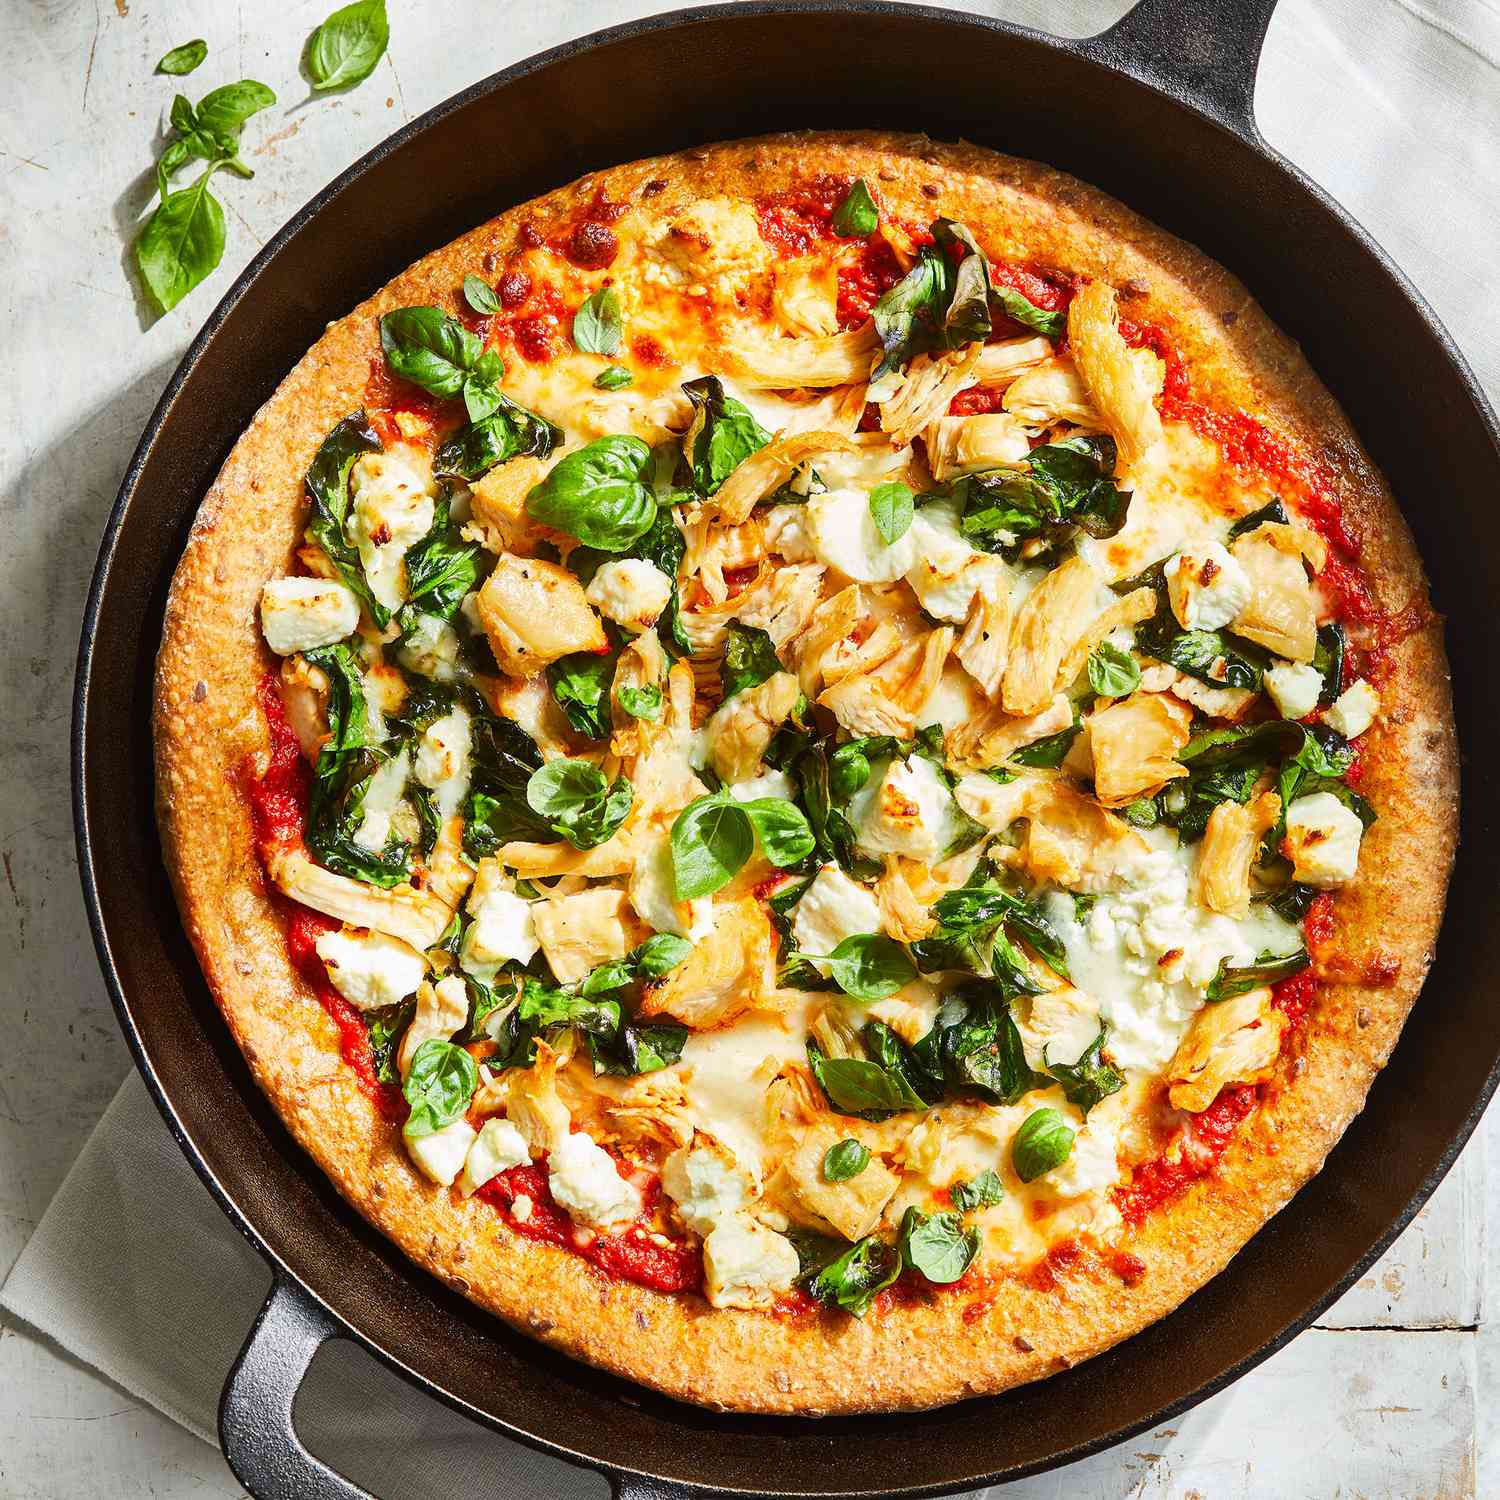 Cast-Iron Skillet Pizza with Red Peppers, Chicken & Spinach